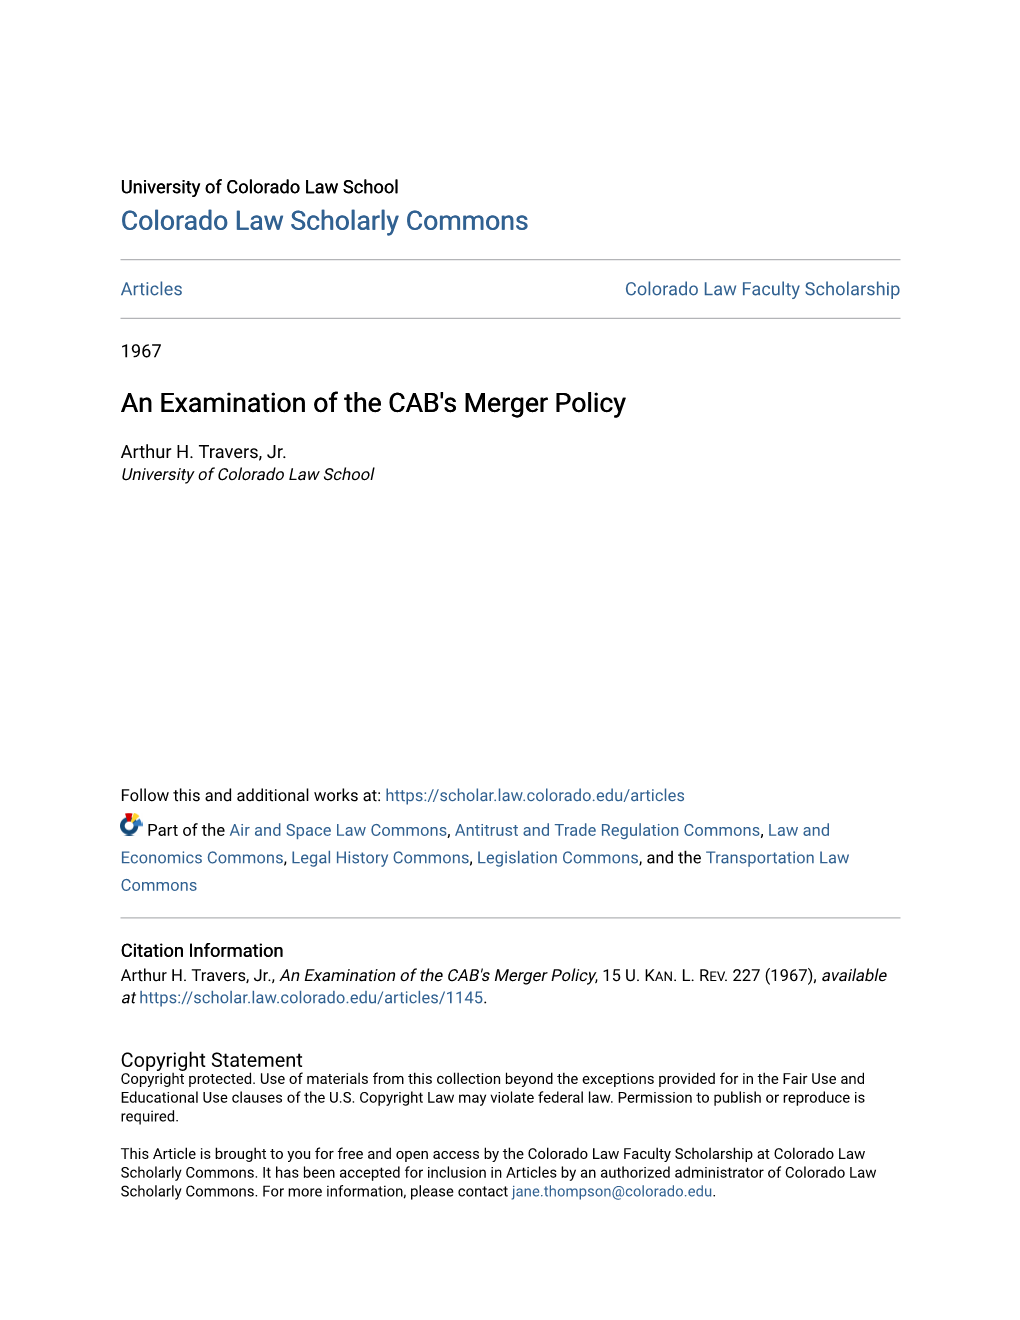 An Examination of the CAB's Merger Policy